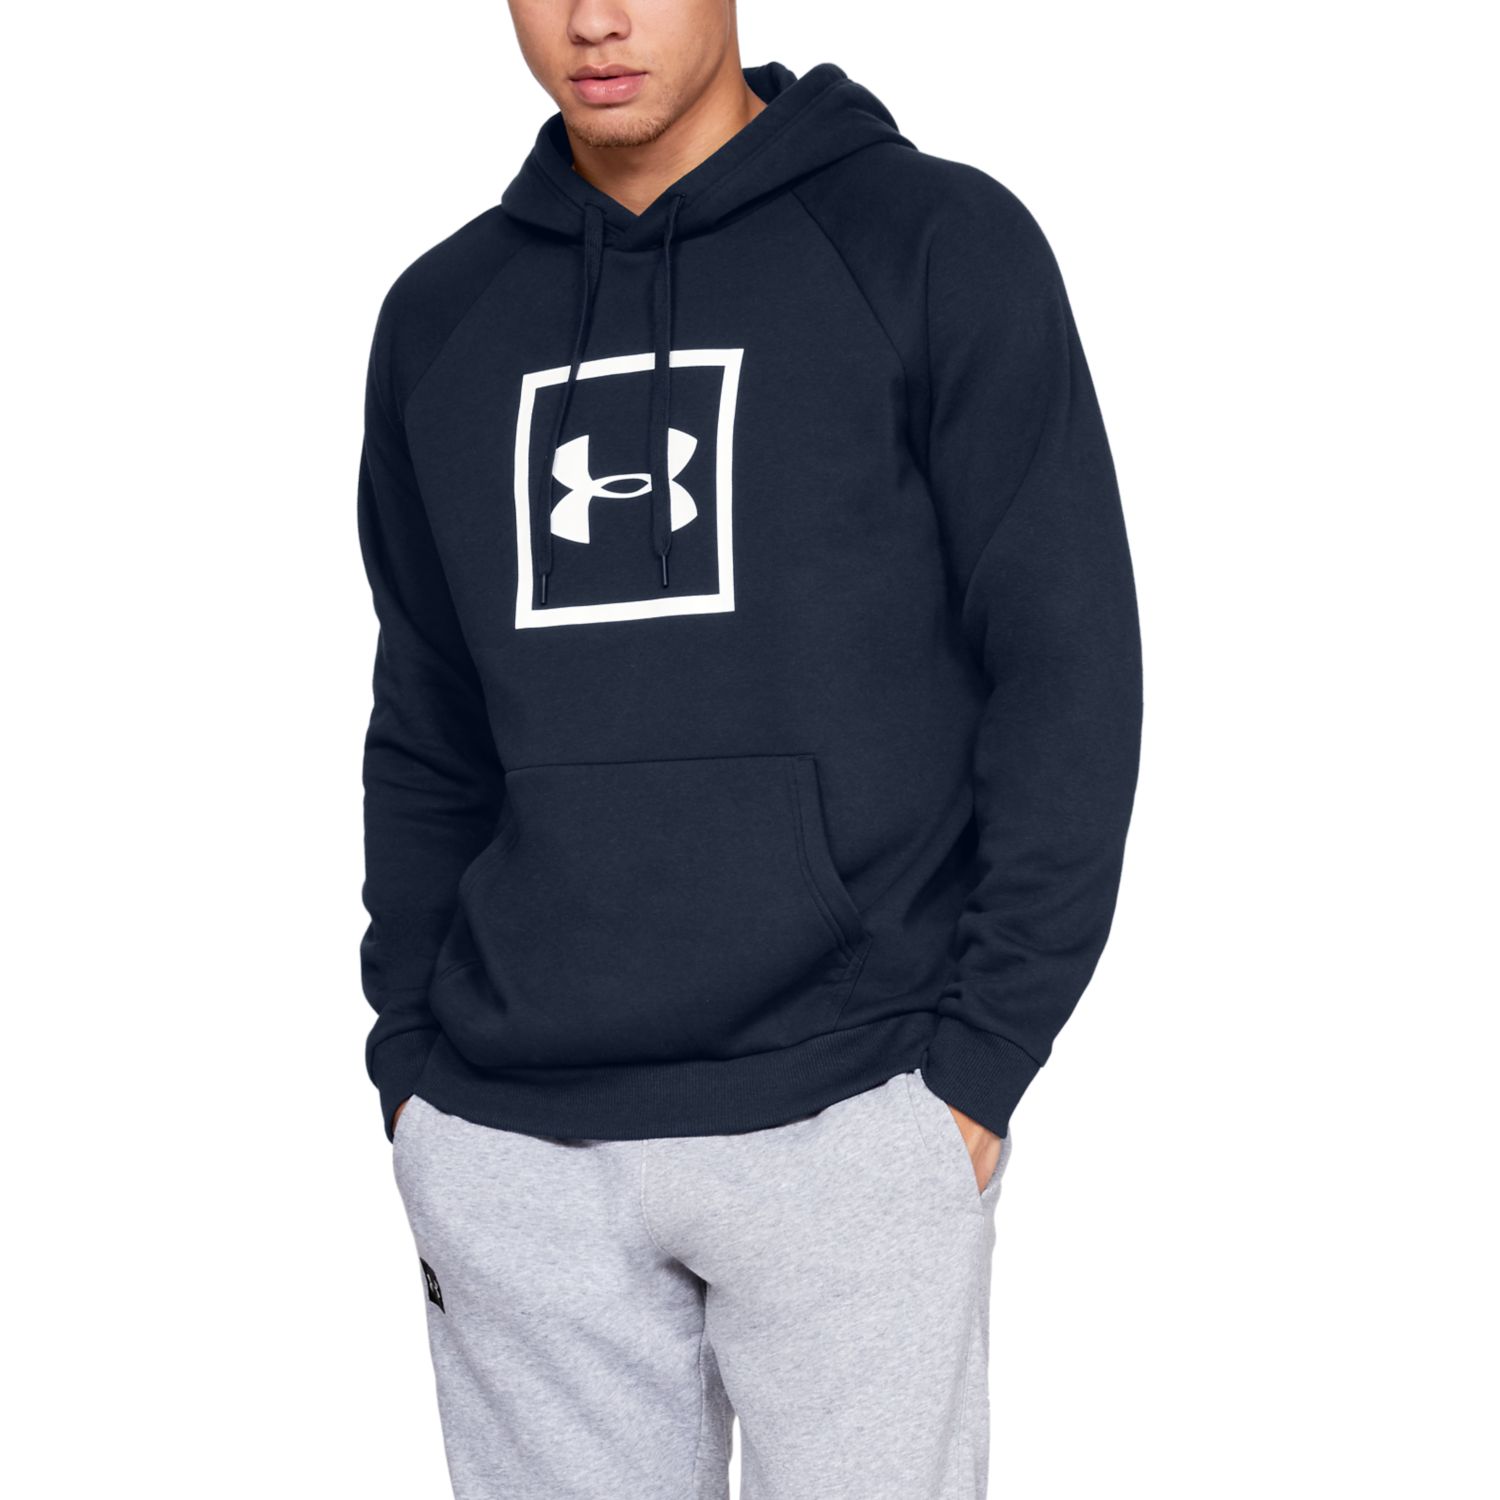 Details about   Under Armour Rival Fleece Hoodie Adult's Teal Hooded Jumper RRP £42 